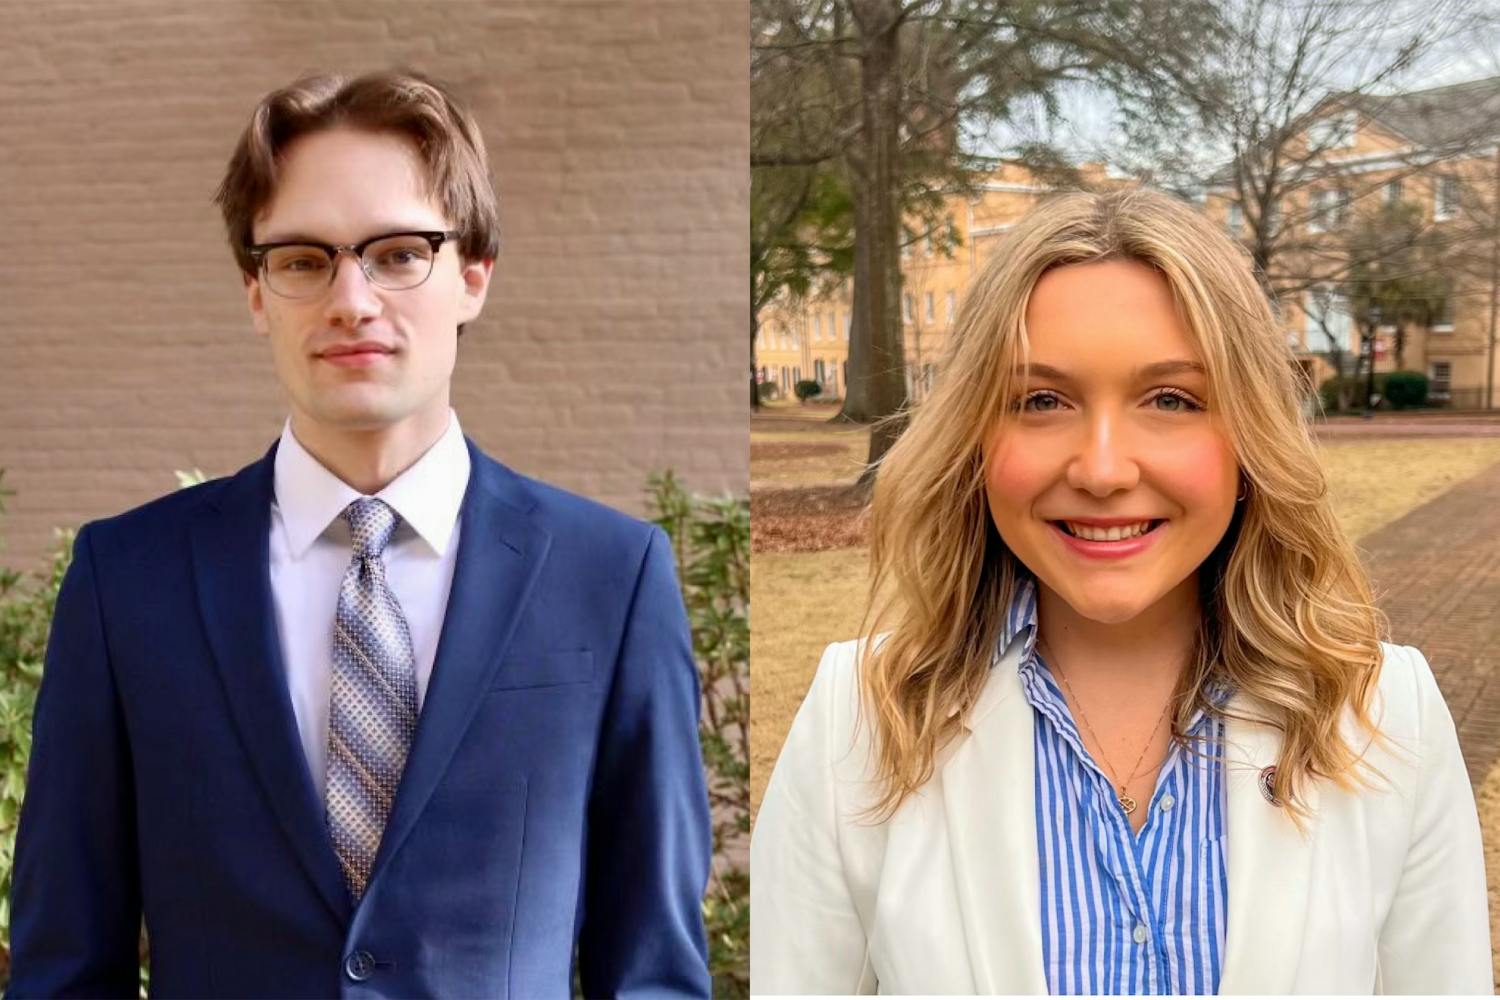 Brandon Badinski (left) and Hannah Augsbach Lamma (right) are the candidates running to be the next student body treasurer. Students can vote for candidates from Feb. 21 at 9 a.m. to Feb. 22 at 5 p.m.&nbsp;